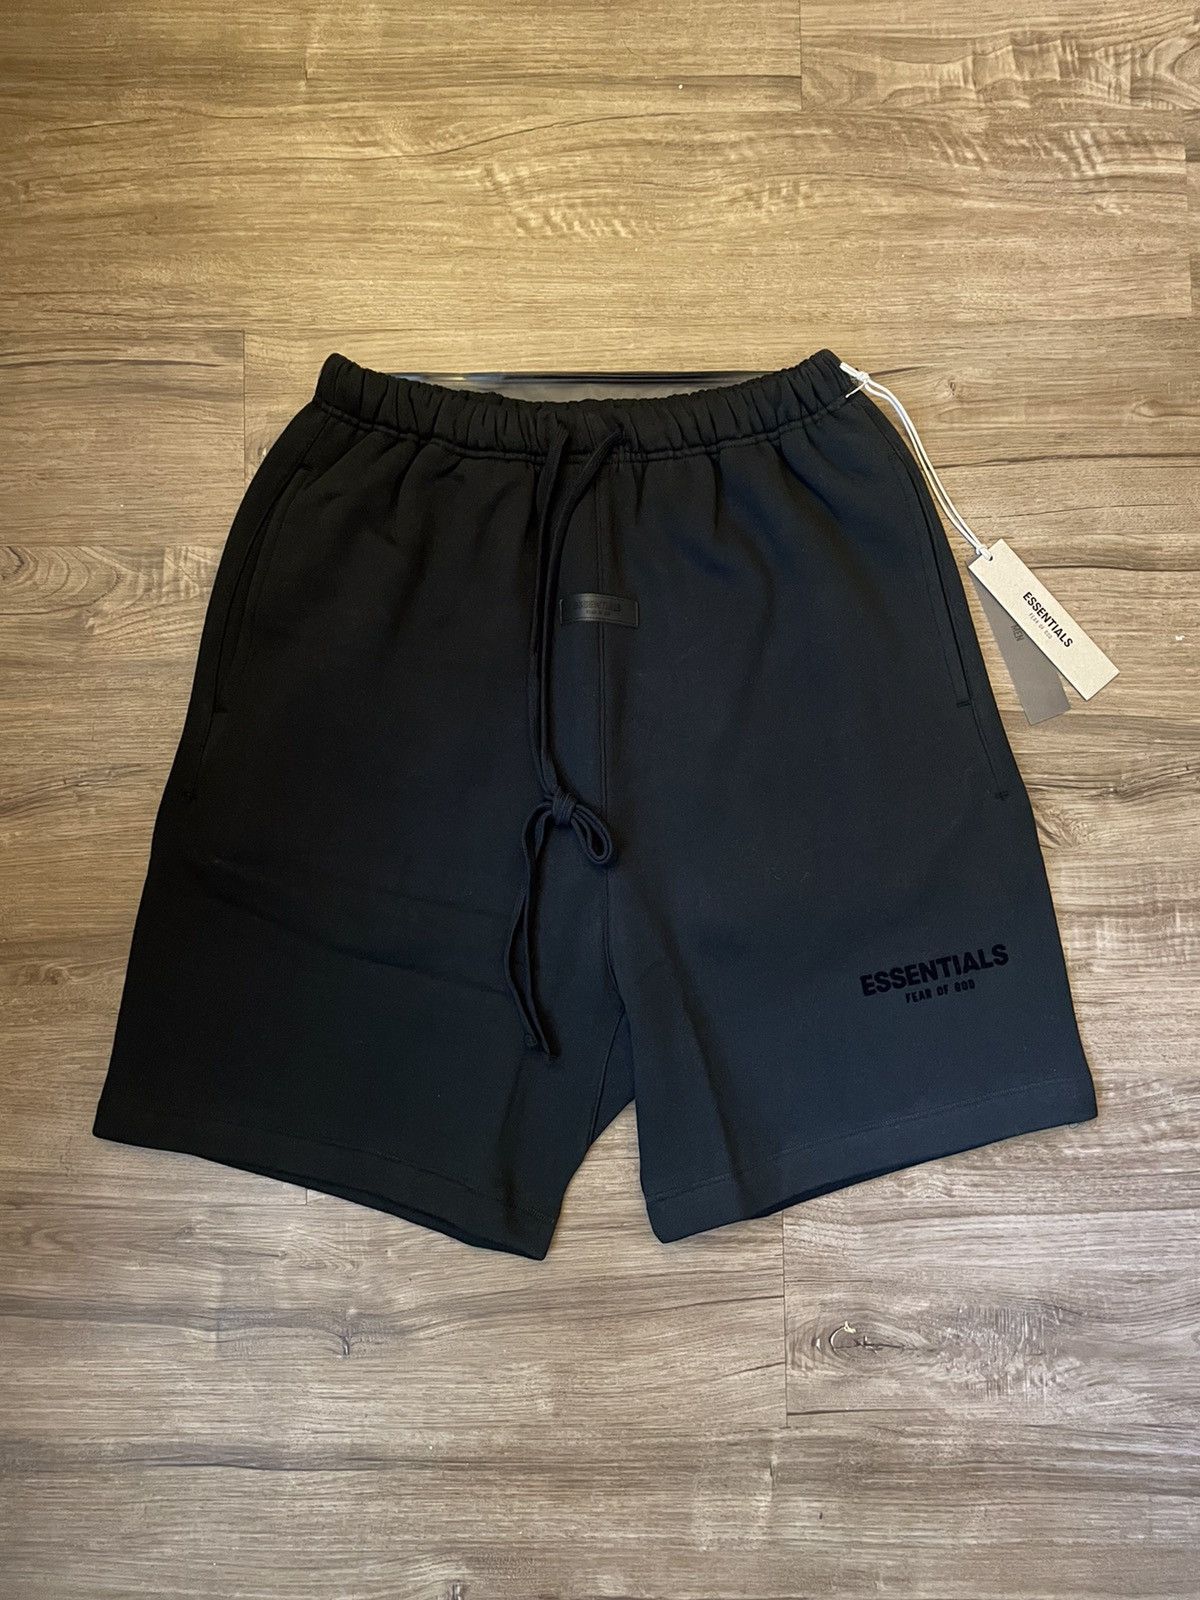 Fear of God Fear of God Essentials Sweat Shorts Stretch Limo Size M |  Grailed